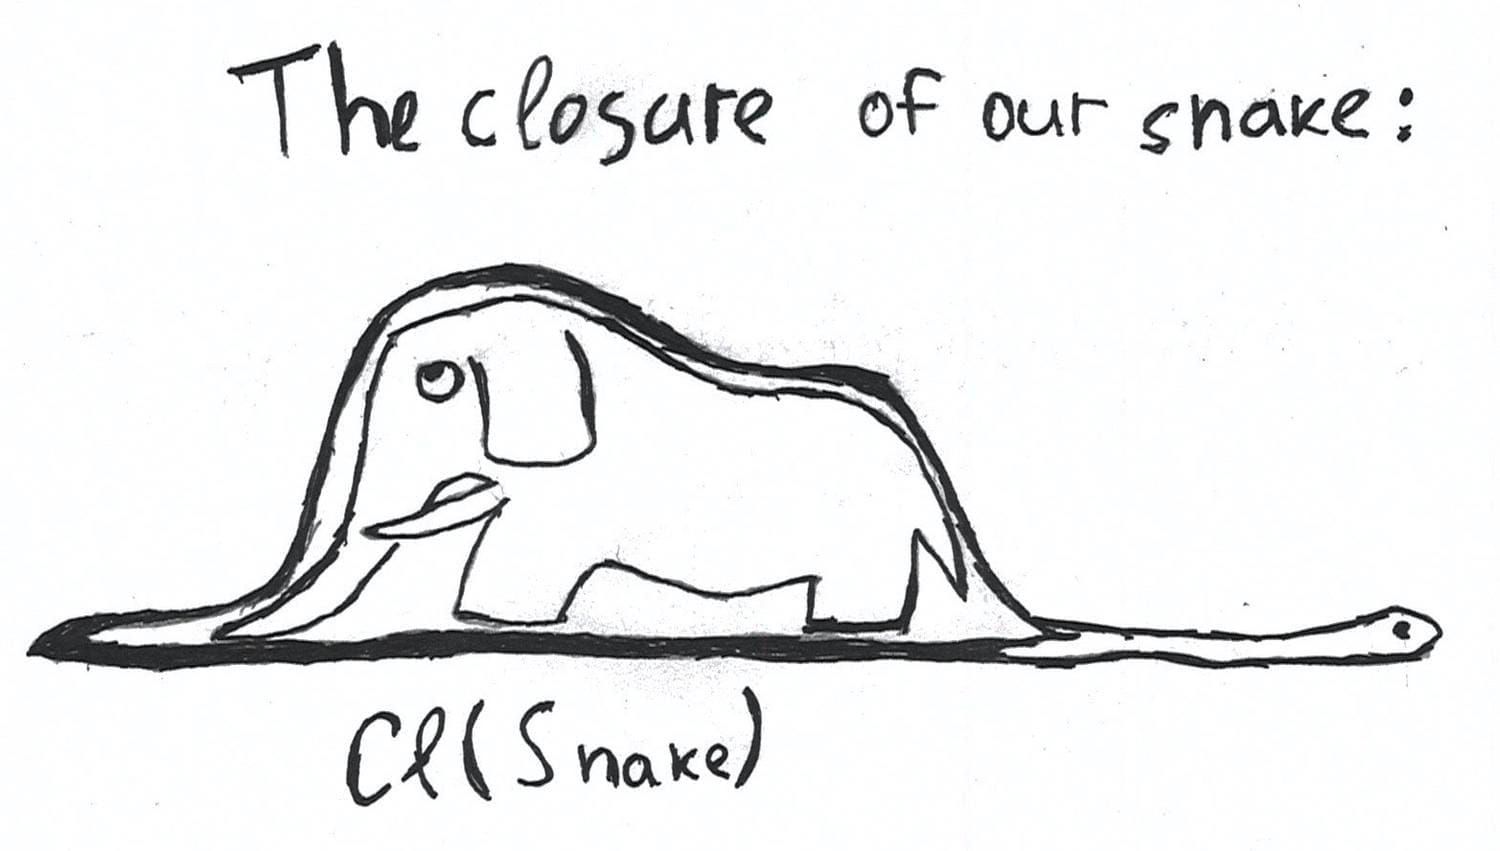 The closure of the snake